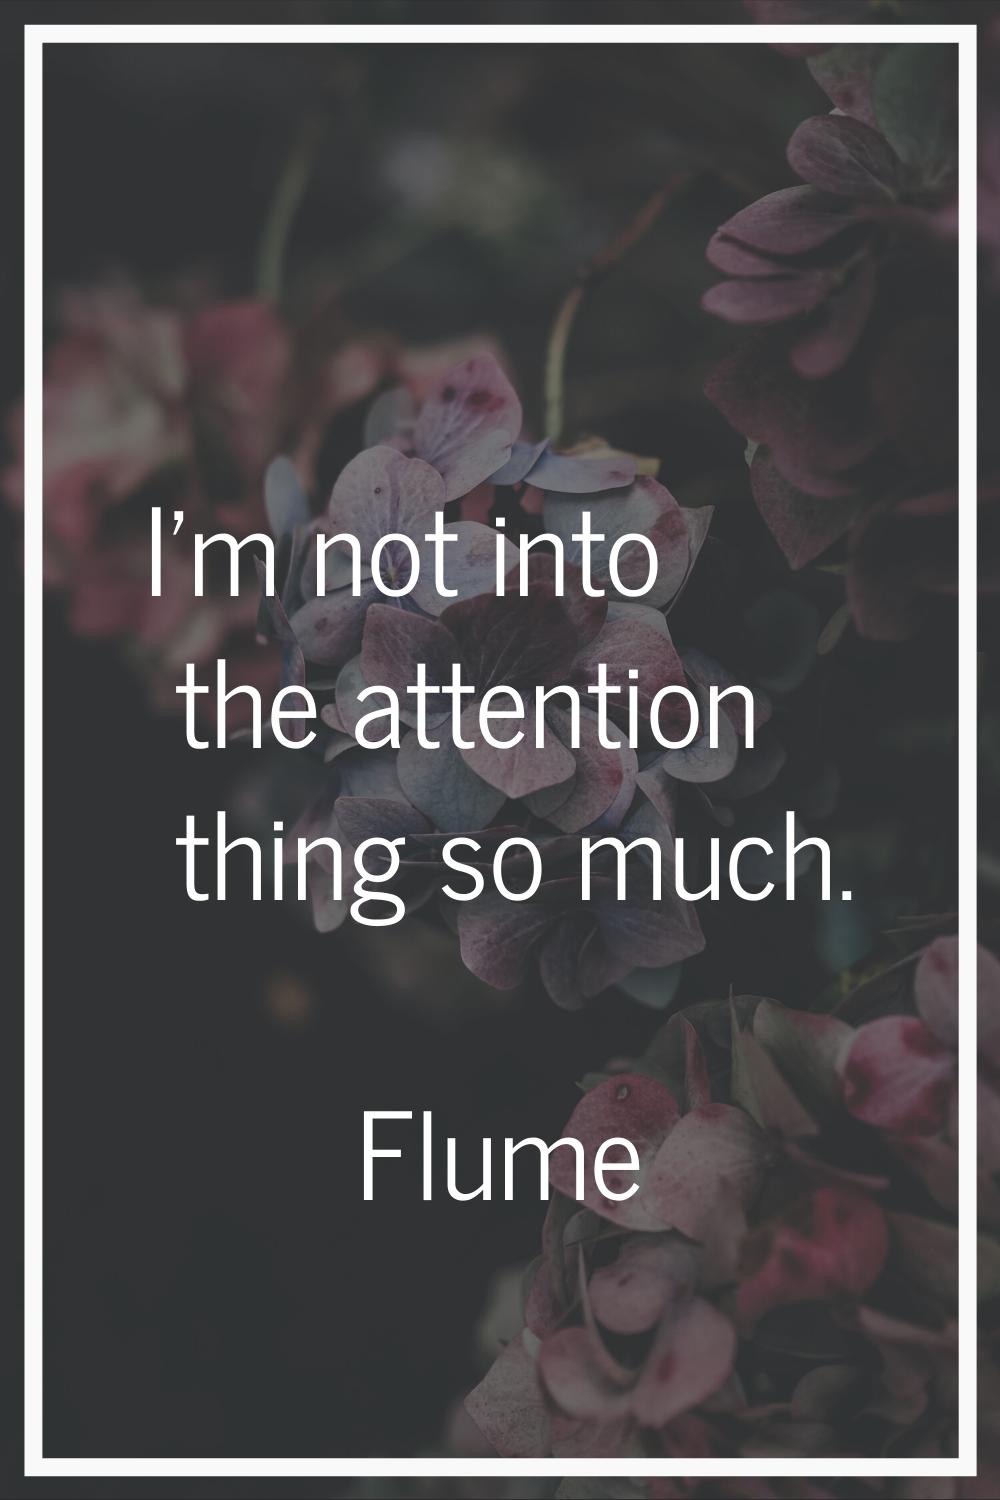 I'm not into the attention thing so much.